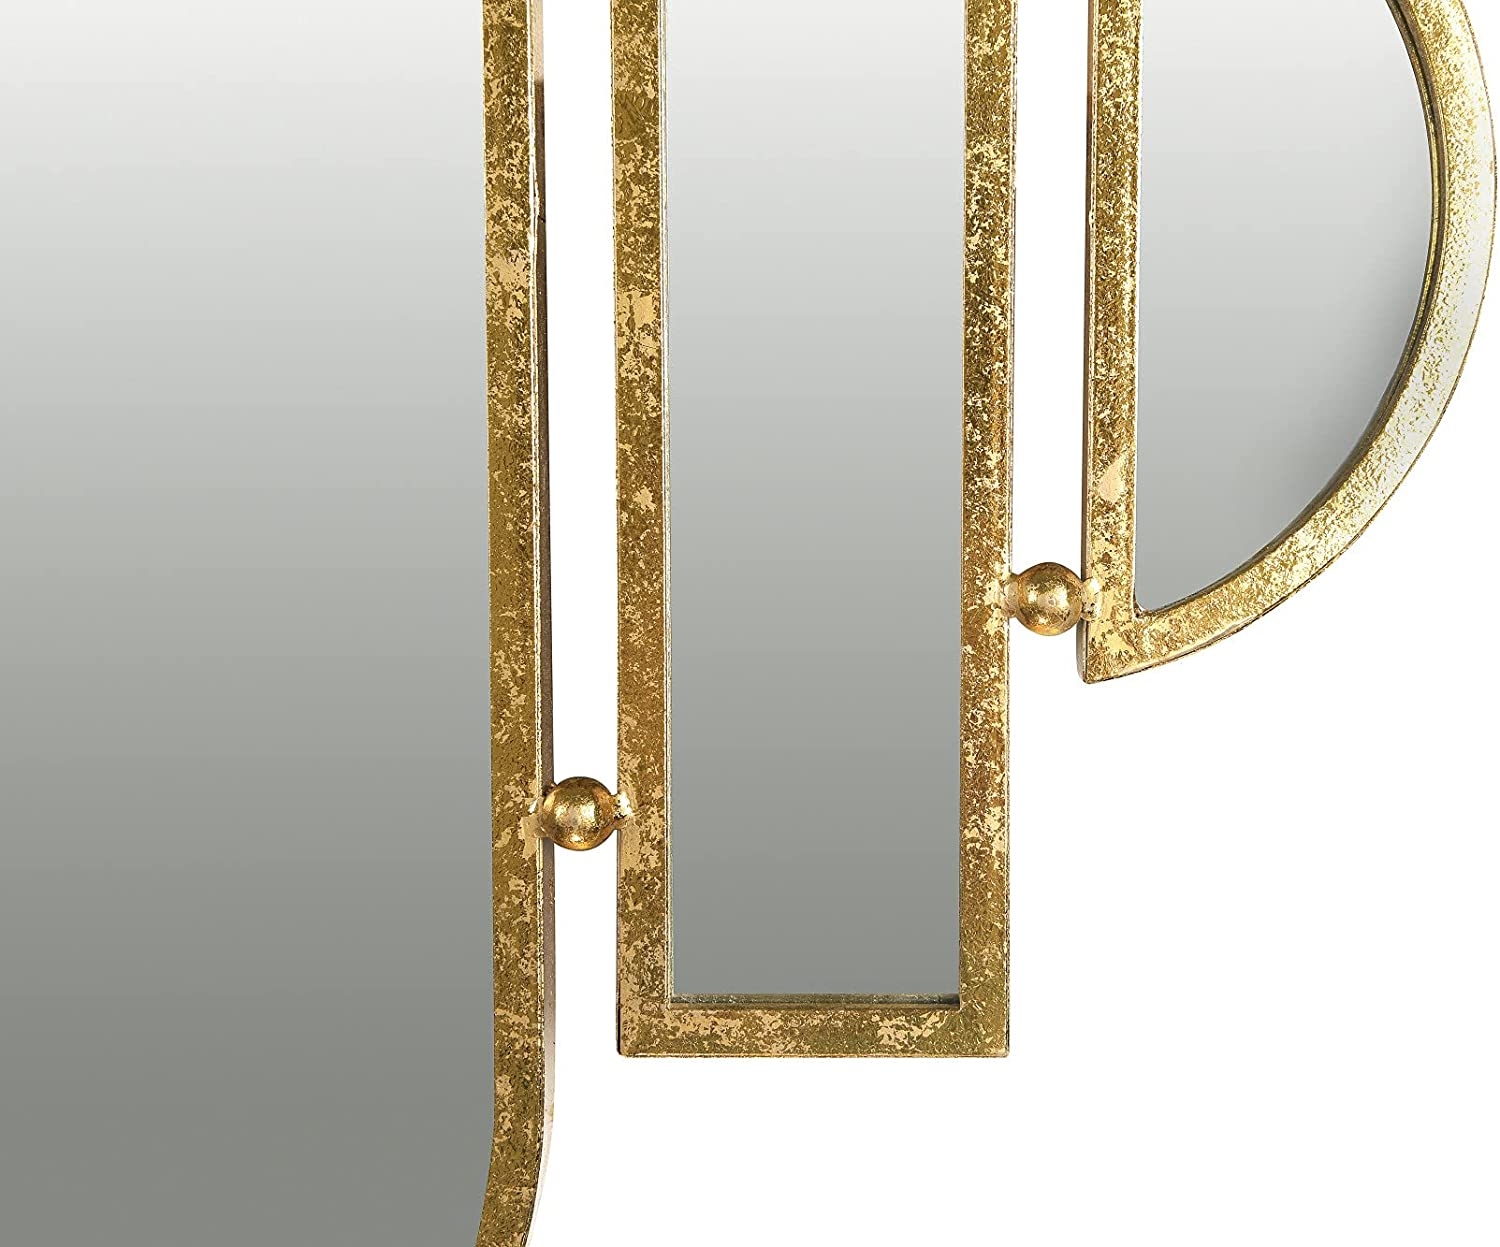 Art Deco 5-Part Wall Mirror With Gold Finish - Image 3